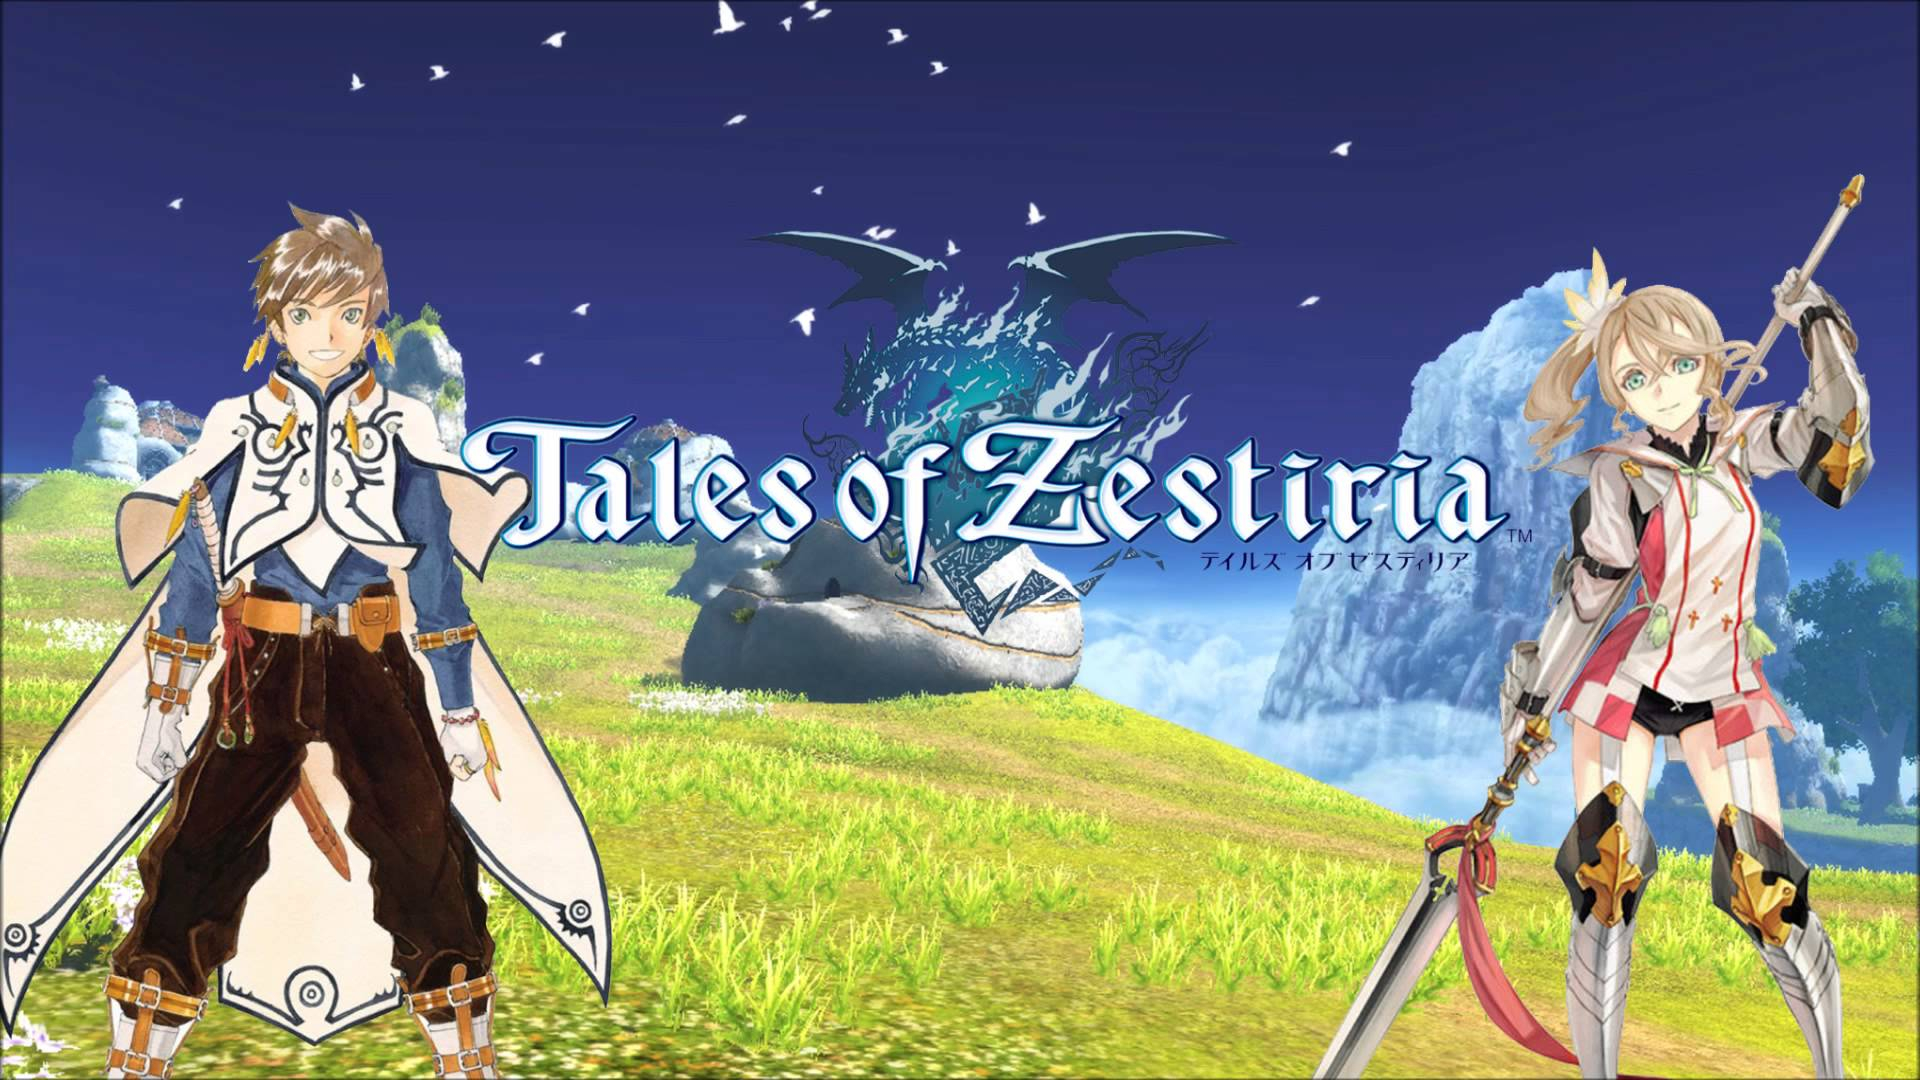 1920x1080 Tales of Zestiria Officially Announced For The PC